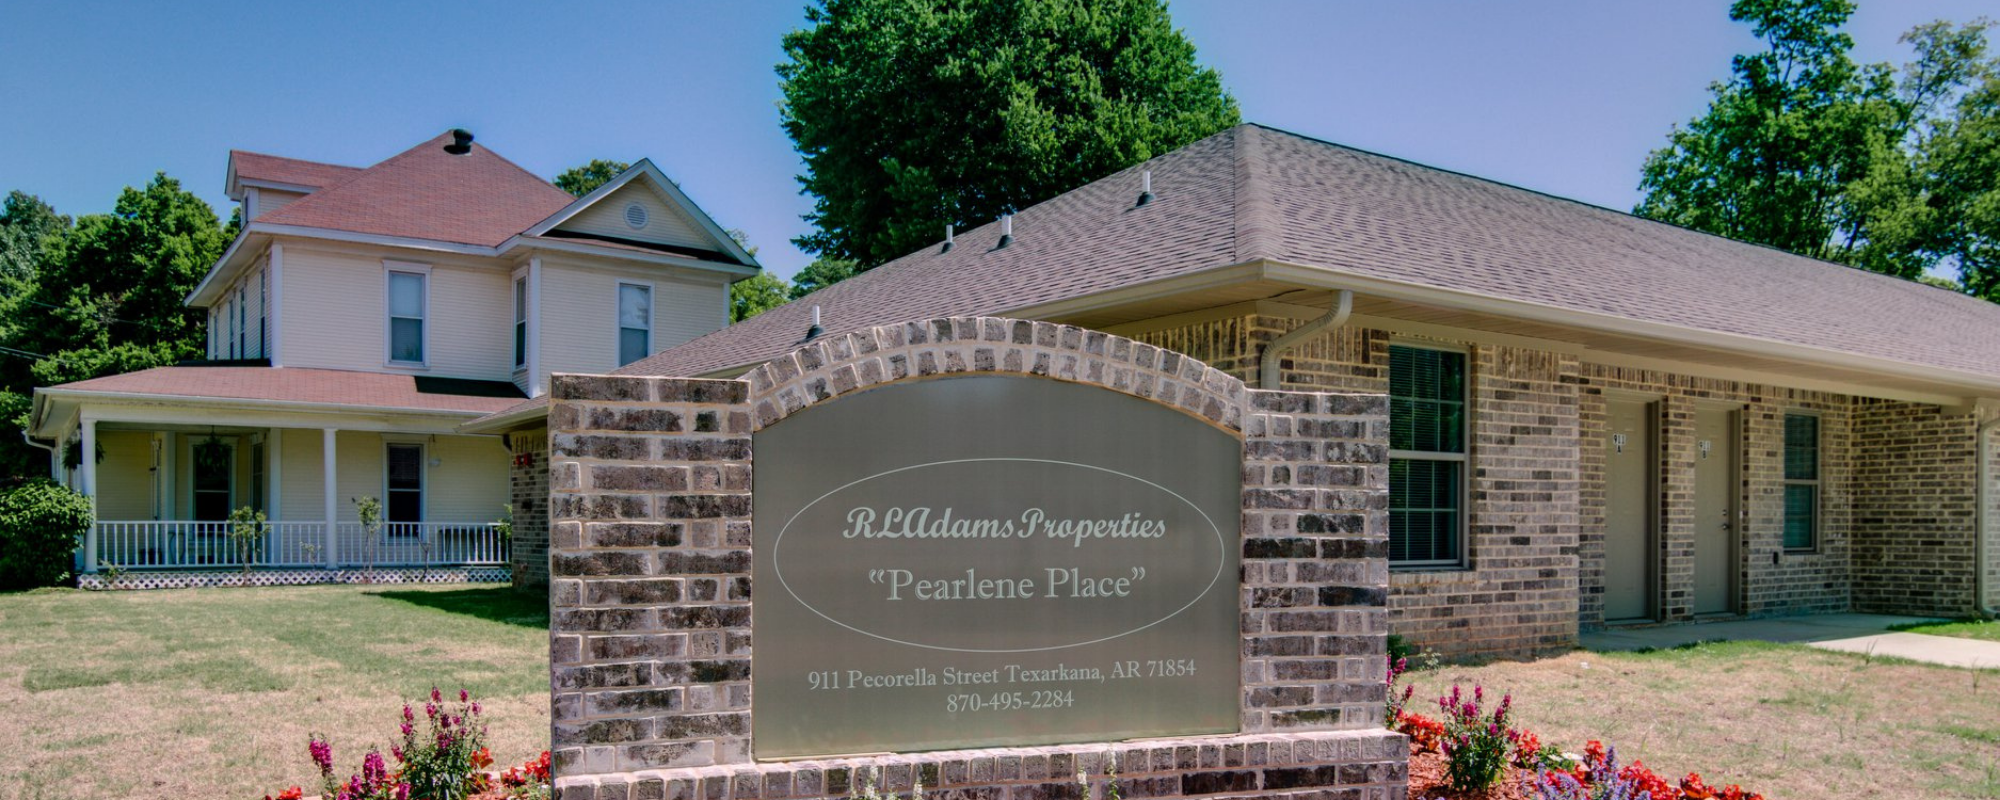 Pearlene Place Apartments